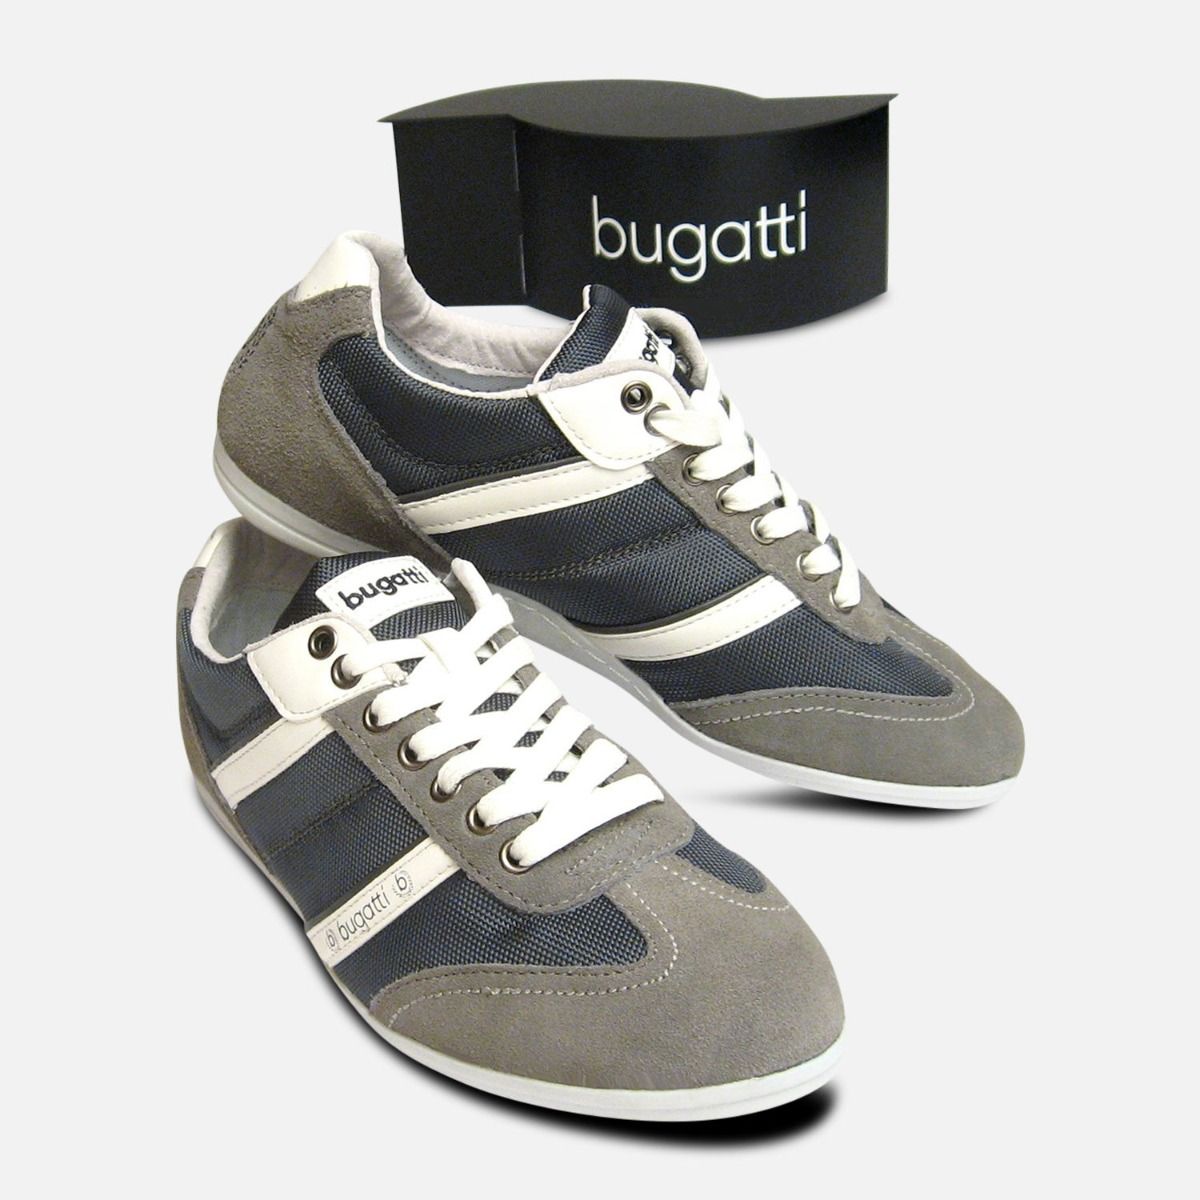 Mens Bugatti Sneakers in Grey Suede Leather Designer Trainers